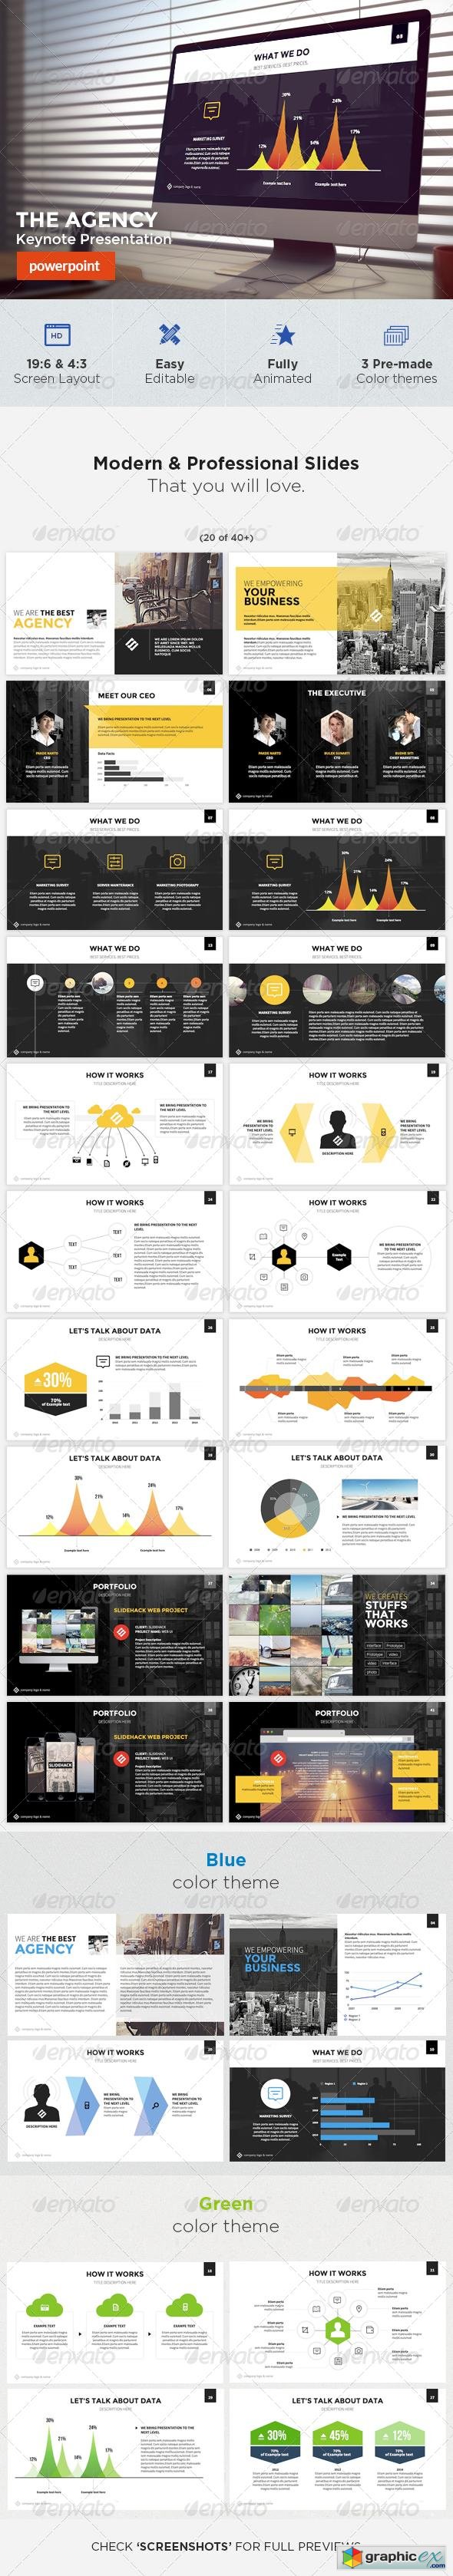 The Agency - Powerpoint Template